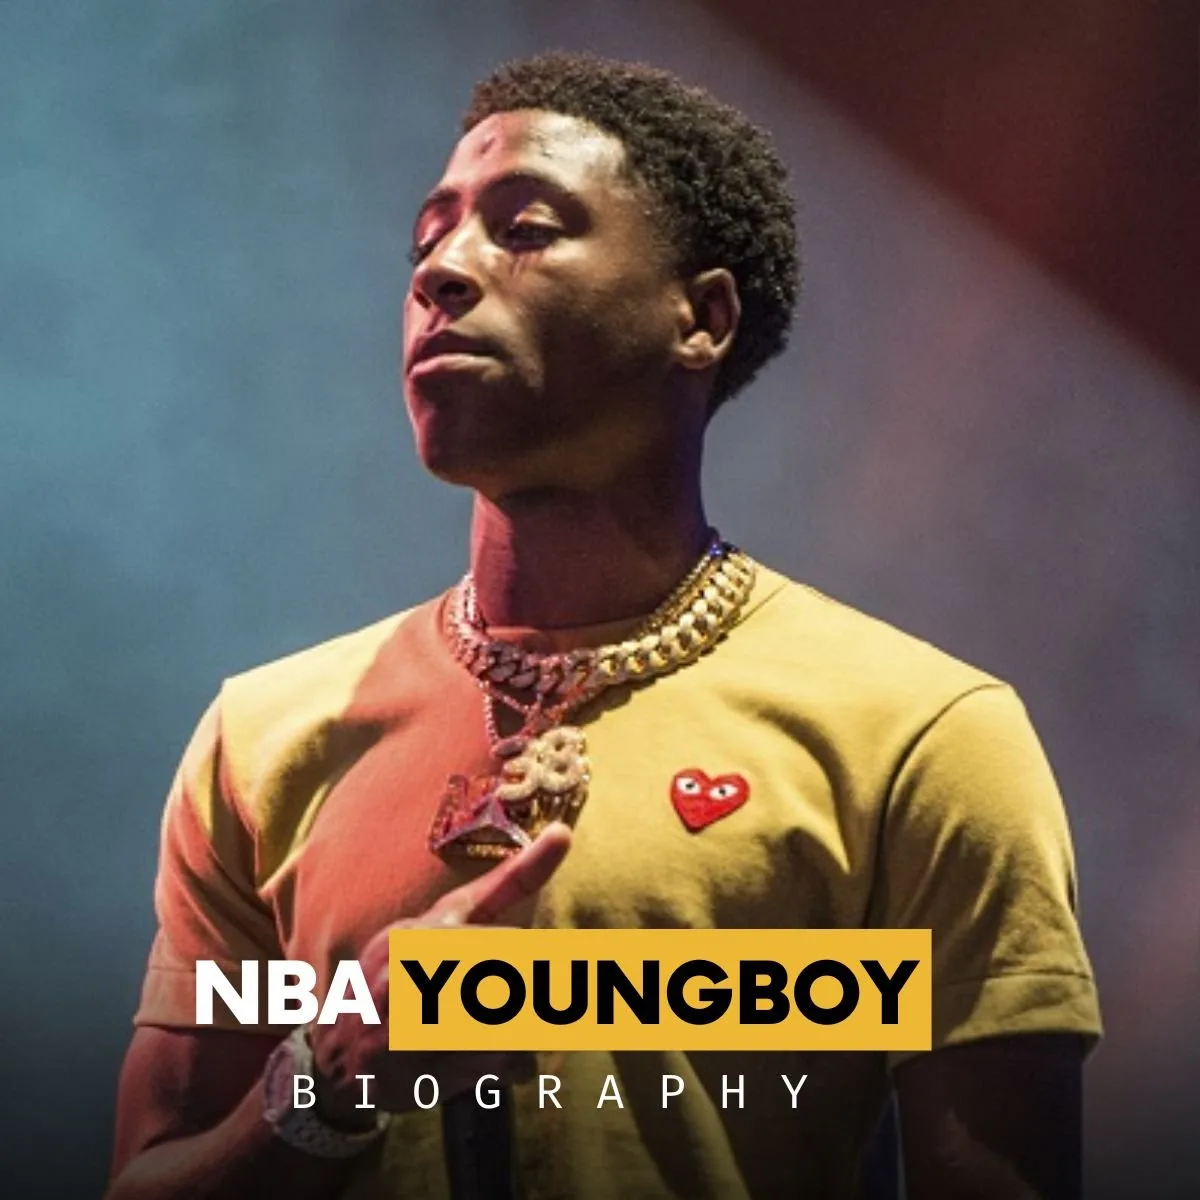 Picture of NBA Youngboy from a live concert